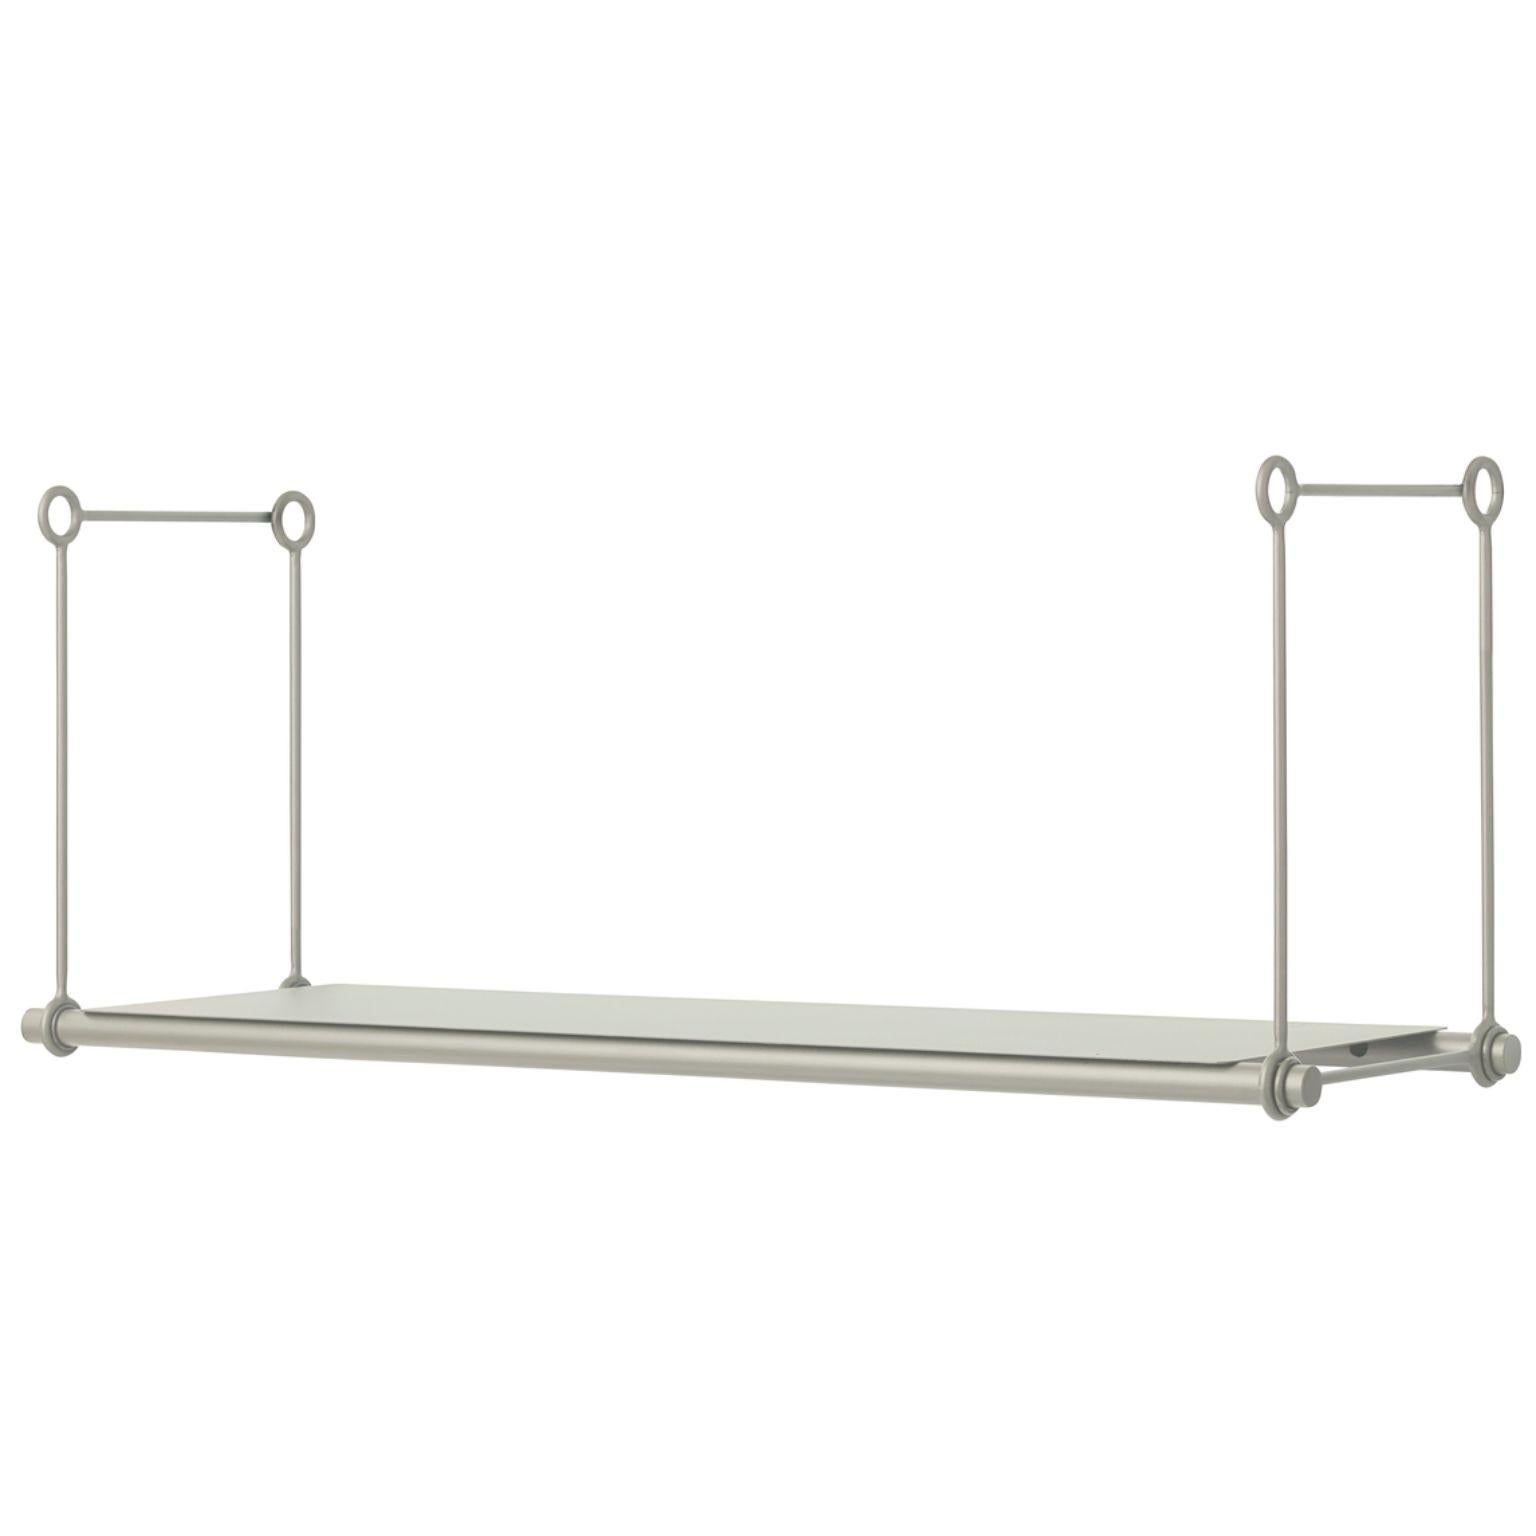 Parade 1 shelf extention warm white by Warm Nordic
Dimensions: D 100 x W 30 x H 39cm
Material: Powder coated steel
Weight: 4 kg
Also available in different colours and dimensions.

Elegant metal shelving unit with plenty of space for all your